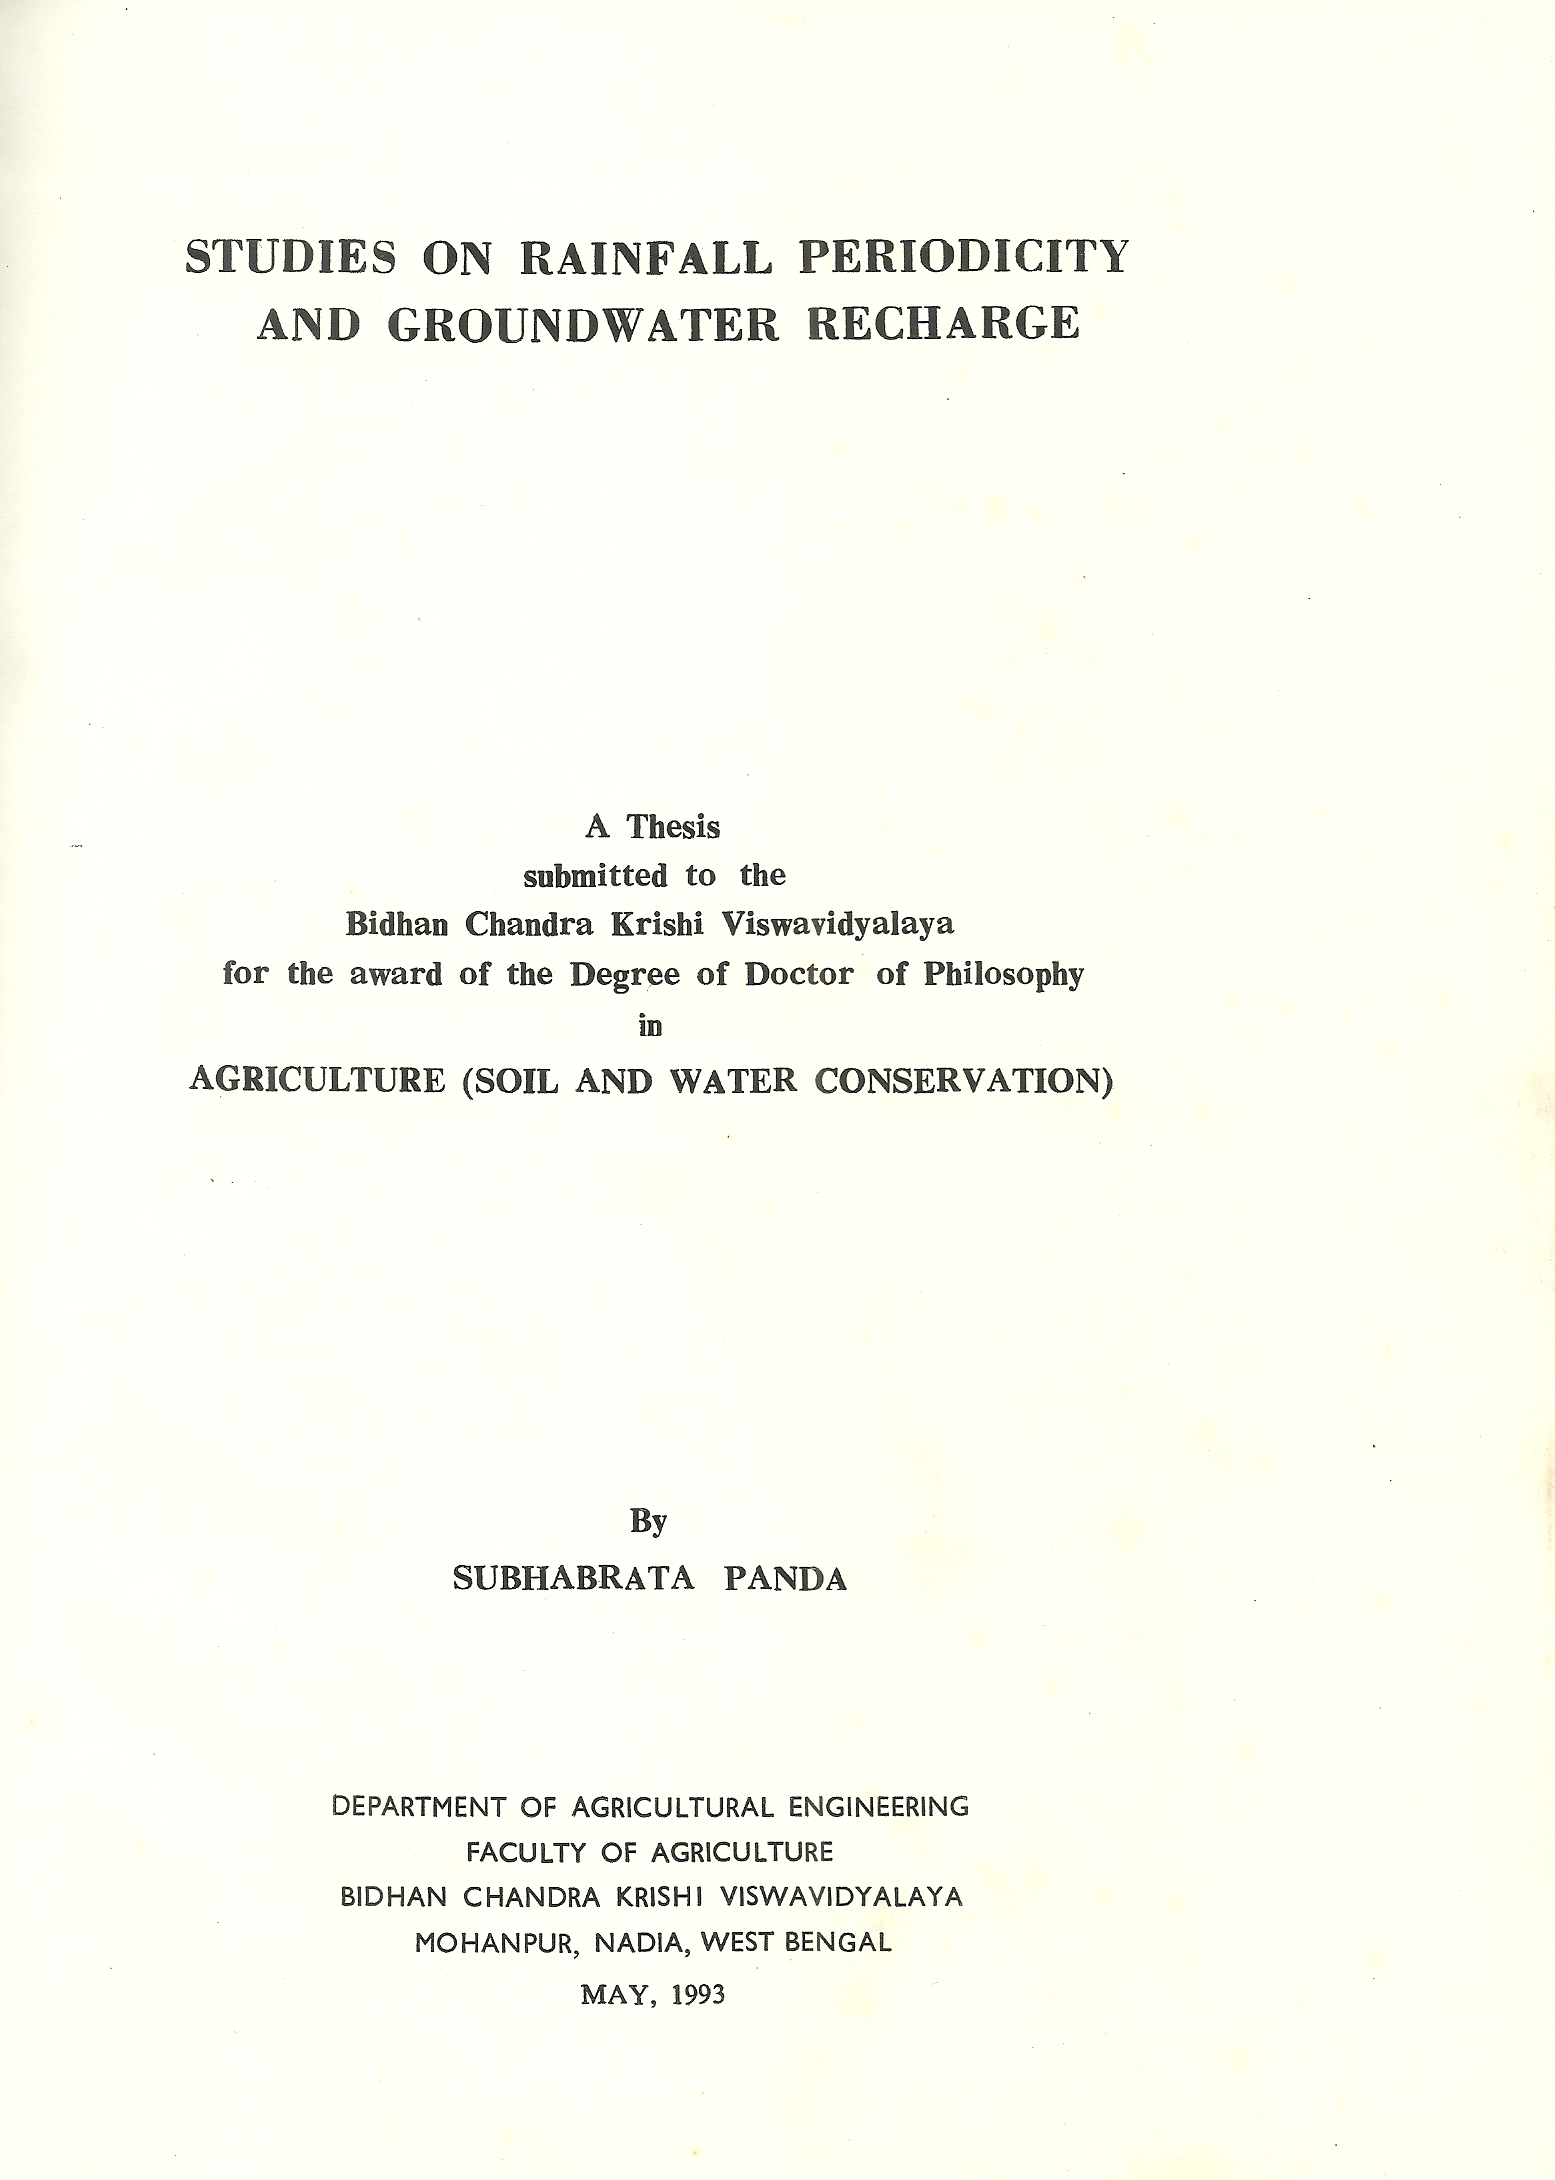 Studies on Studies on Rainfall Periodicity and Groundwater Recharge